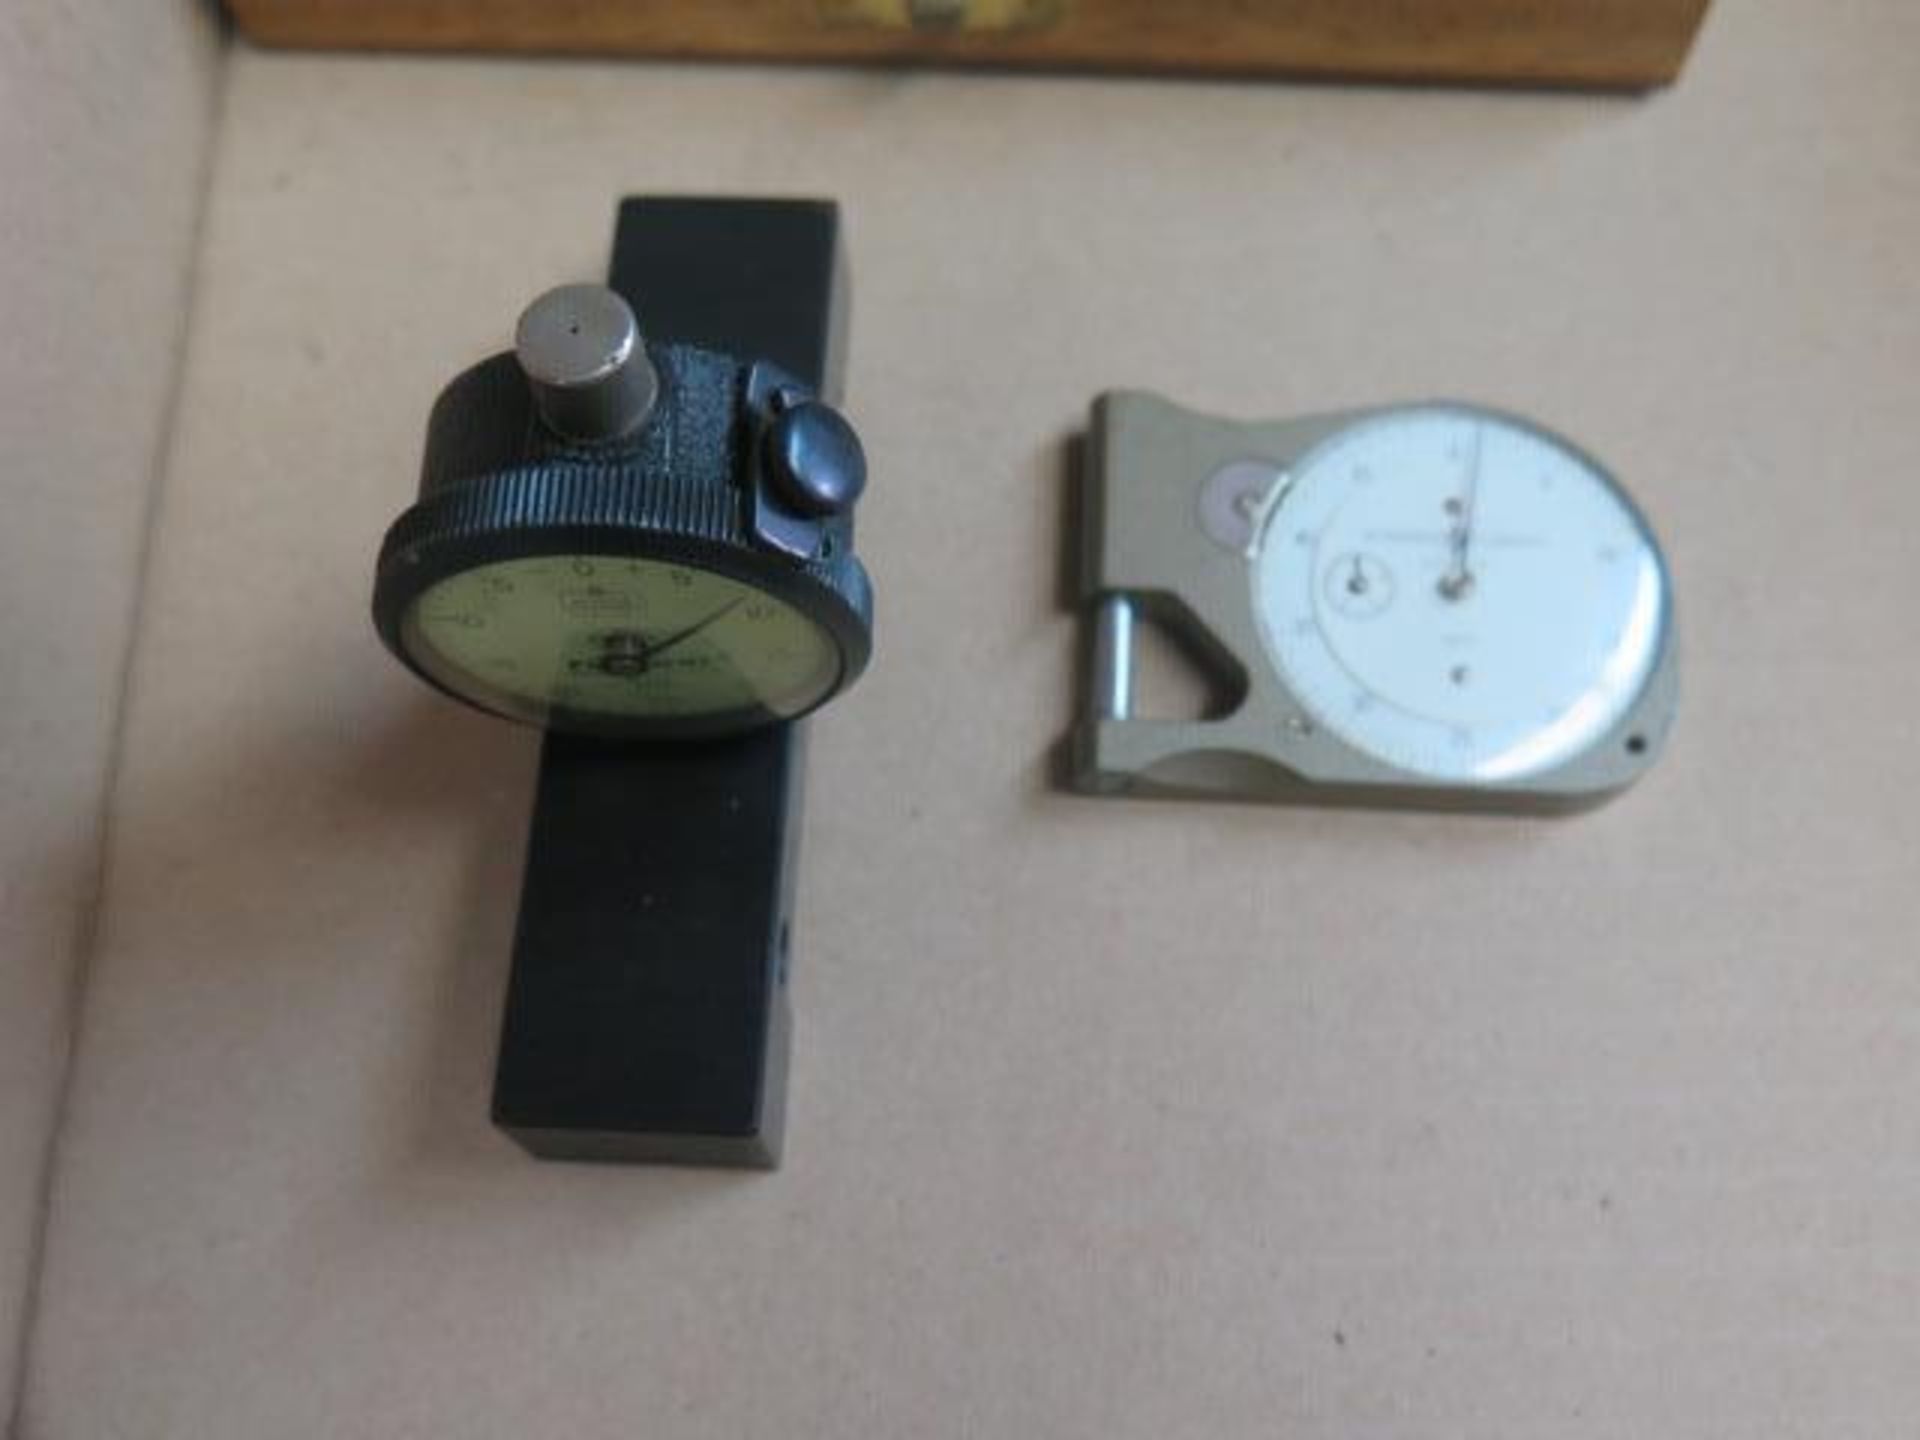 Quicktest .4"-.8" Dial Cliper Gage, Scherr Tumico 1/2" Dial Snap Gage and Federal Dial Flatness Gage - Image 4 of 4